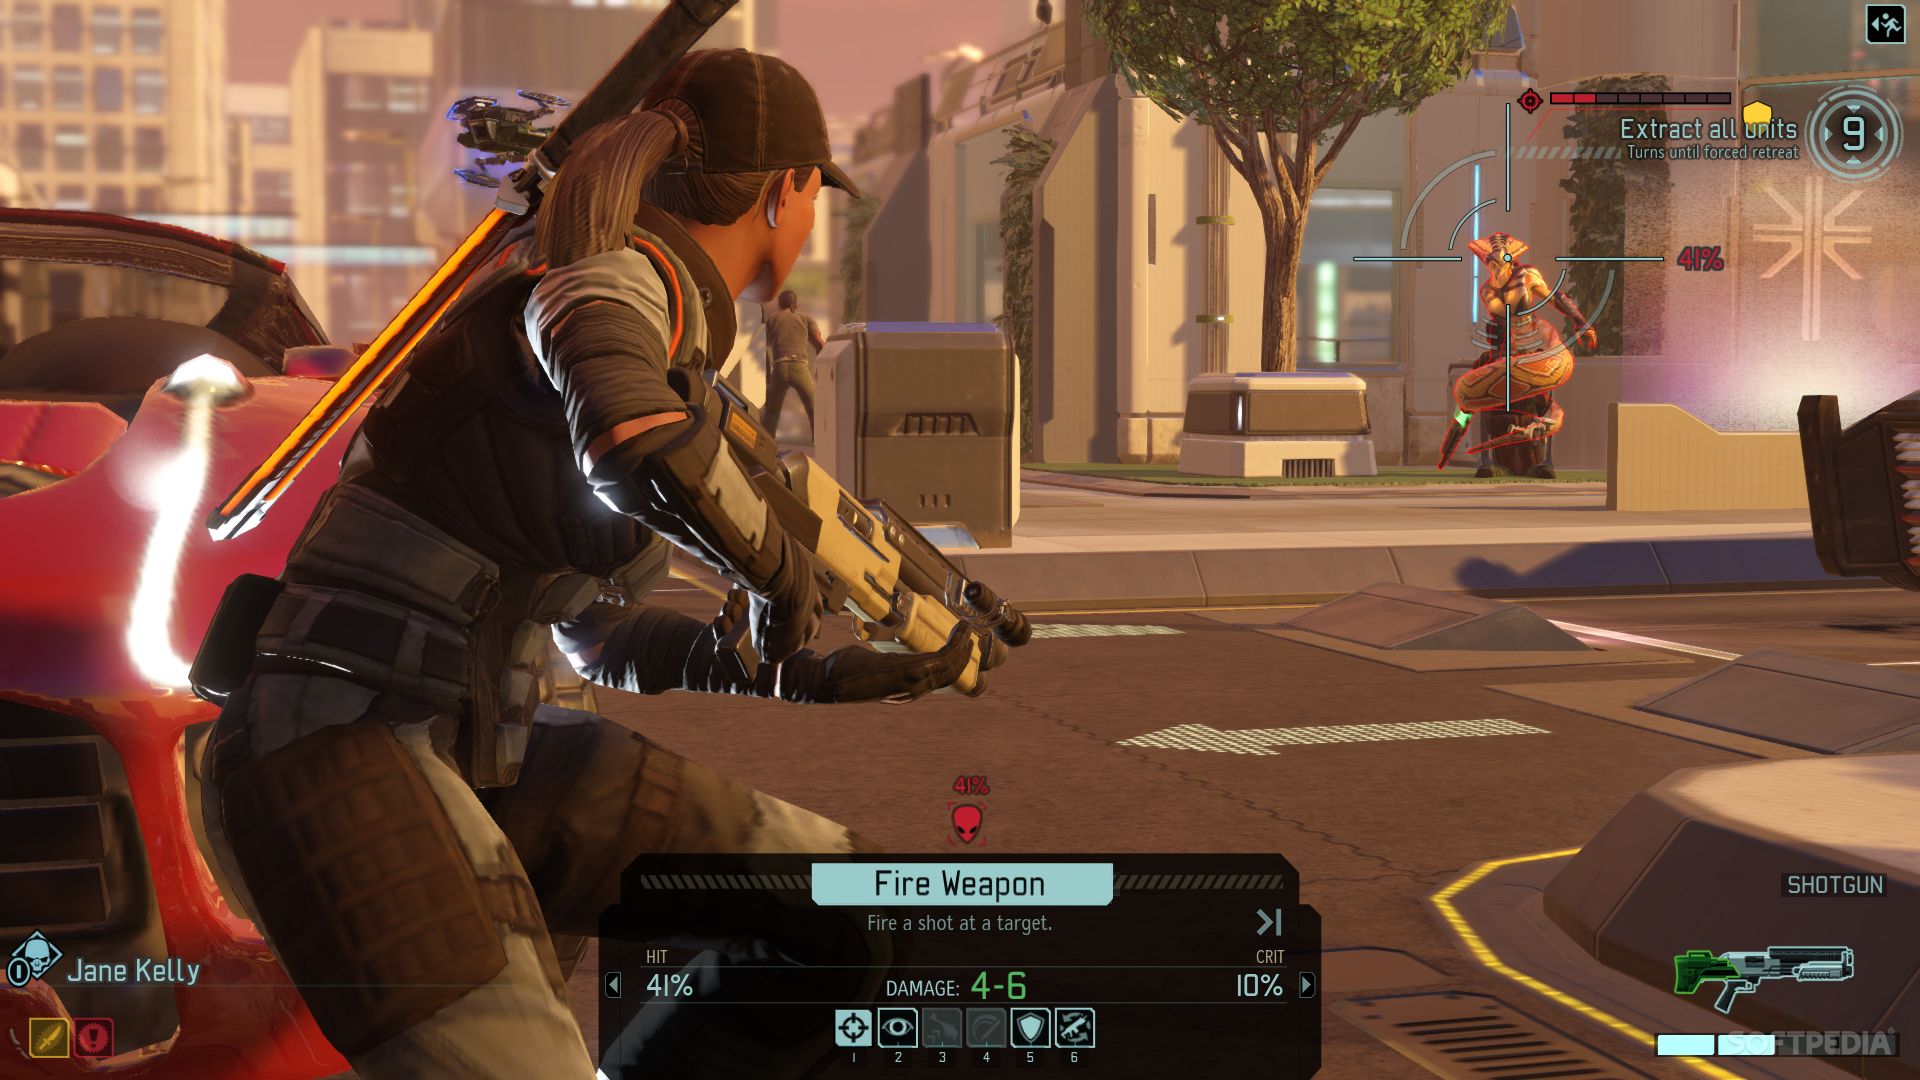 xcom-2-receives-first-patch-to-improve-performance-and-frame-skipping-500571-2.jpg